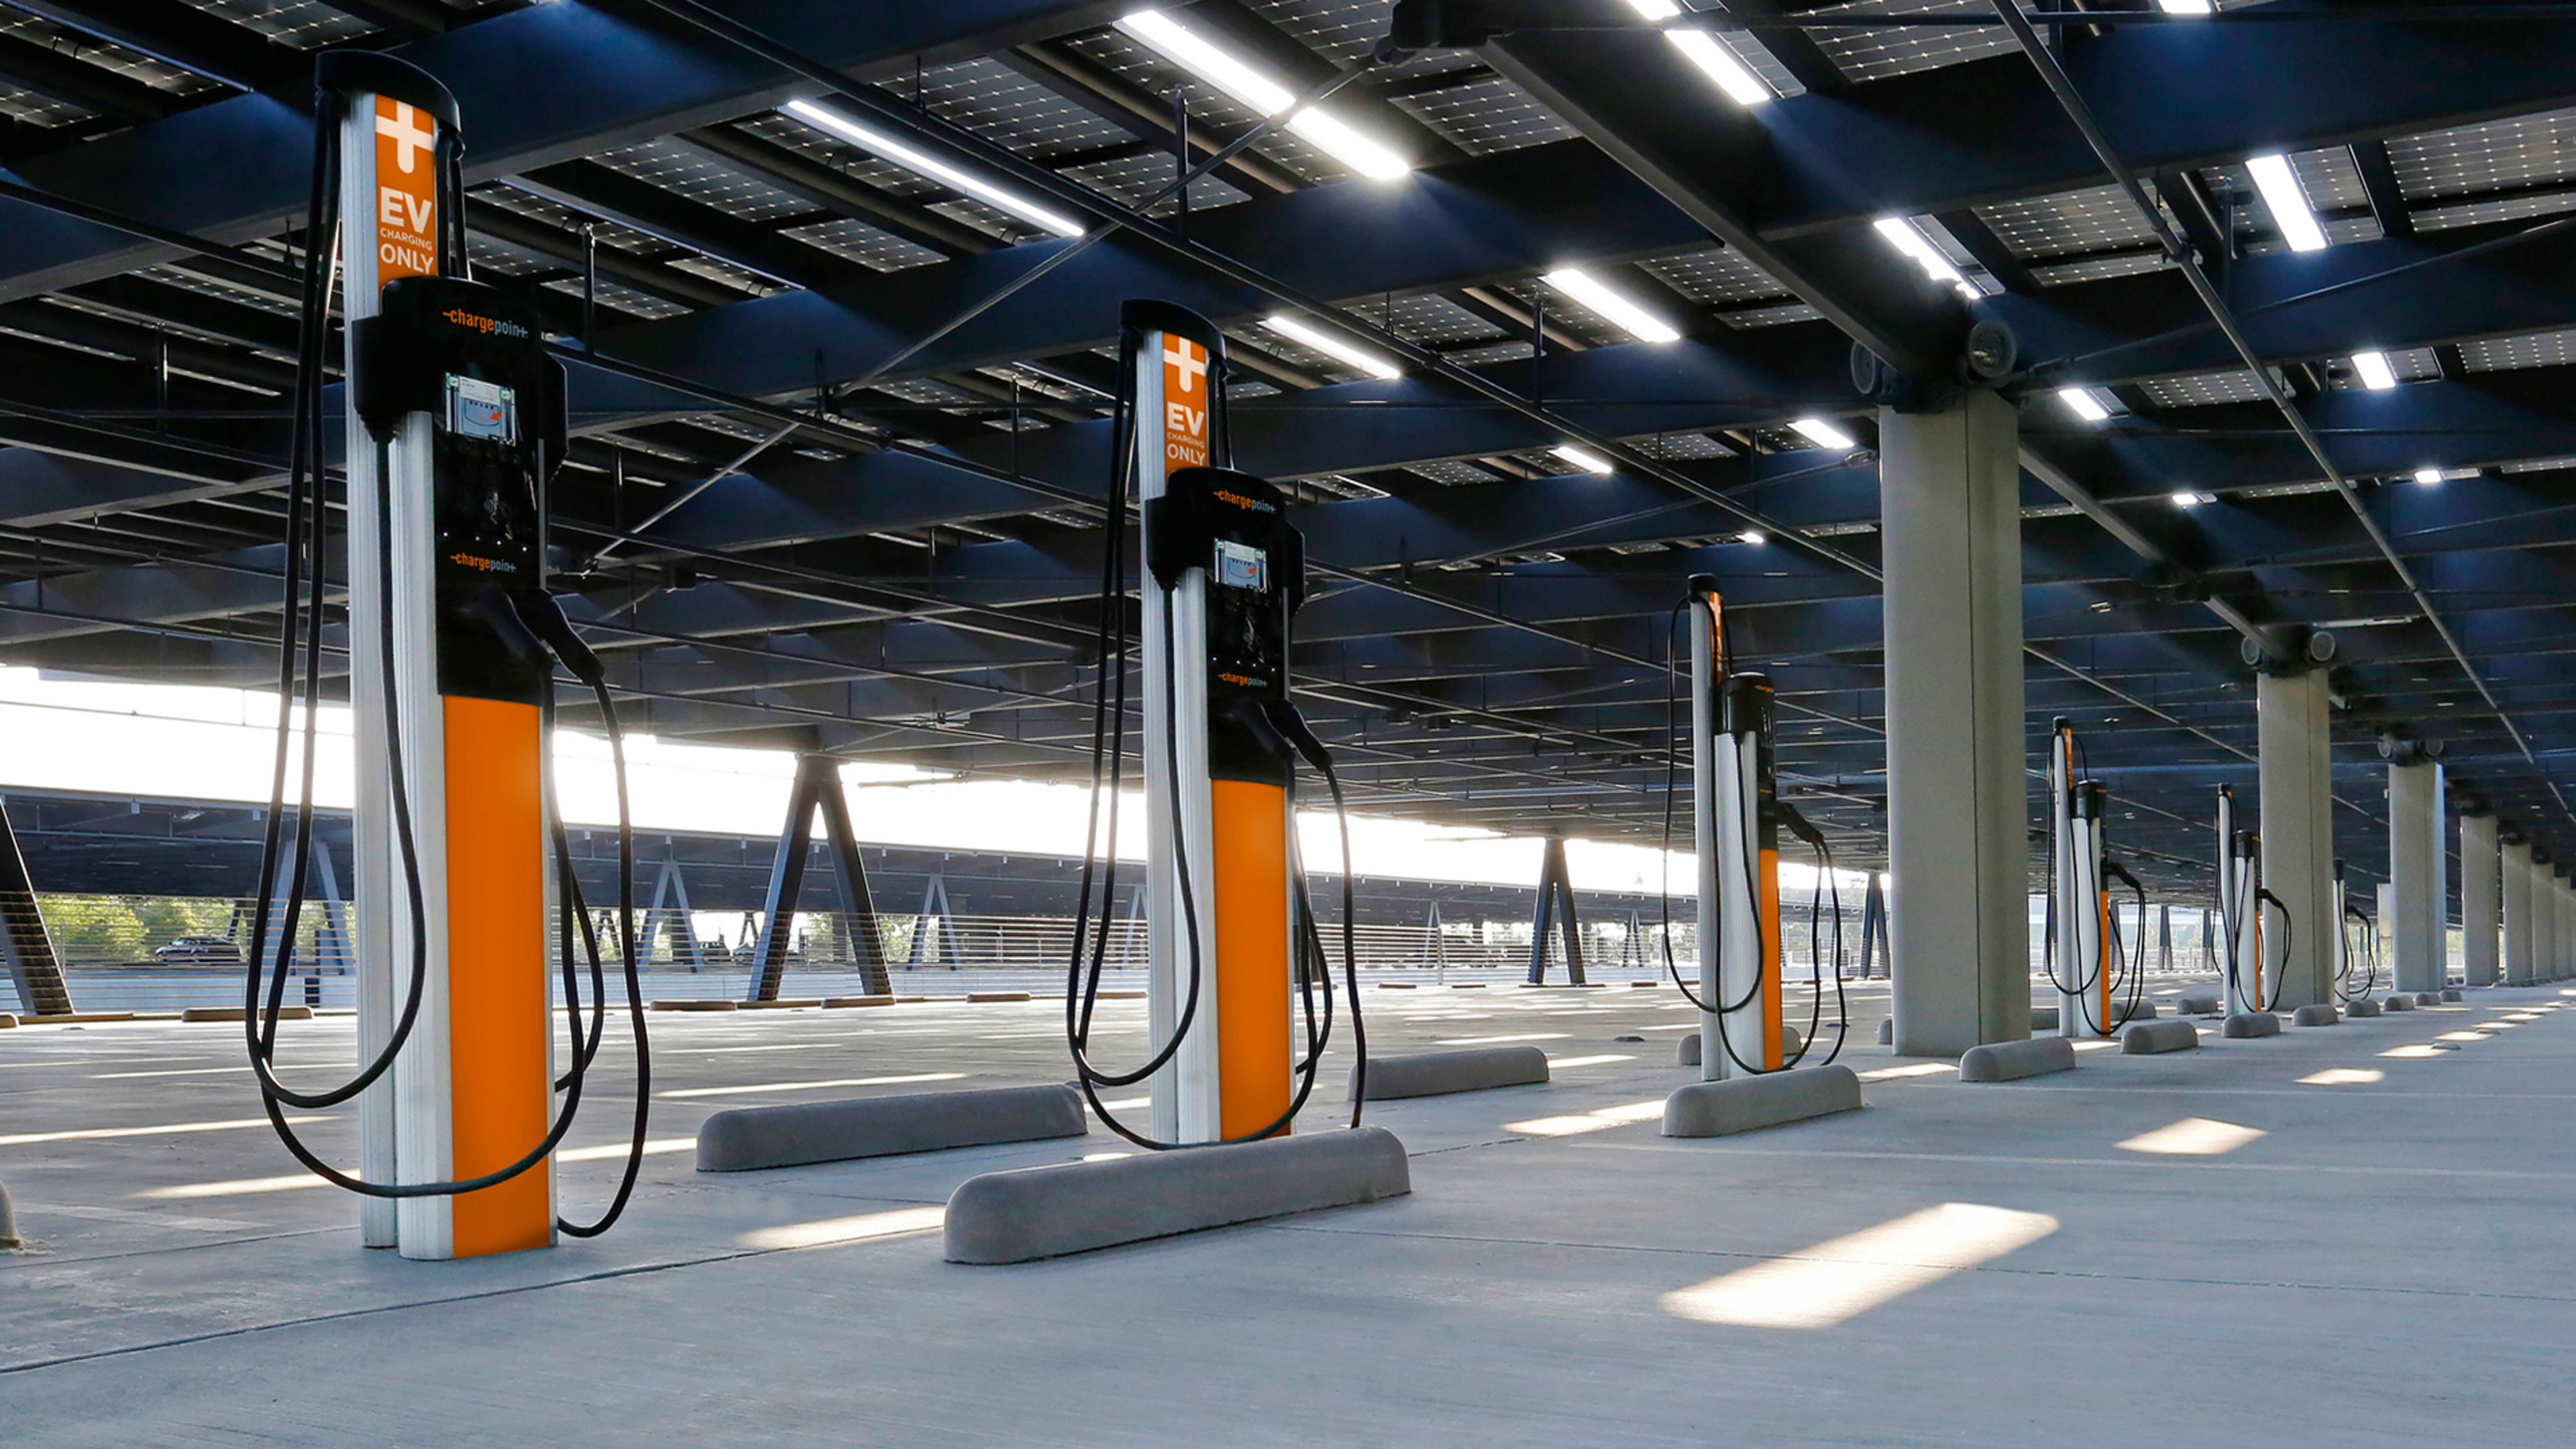 The world’s largest network of electric vehicle chargers just raised another $240 million